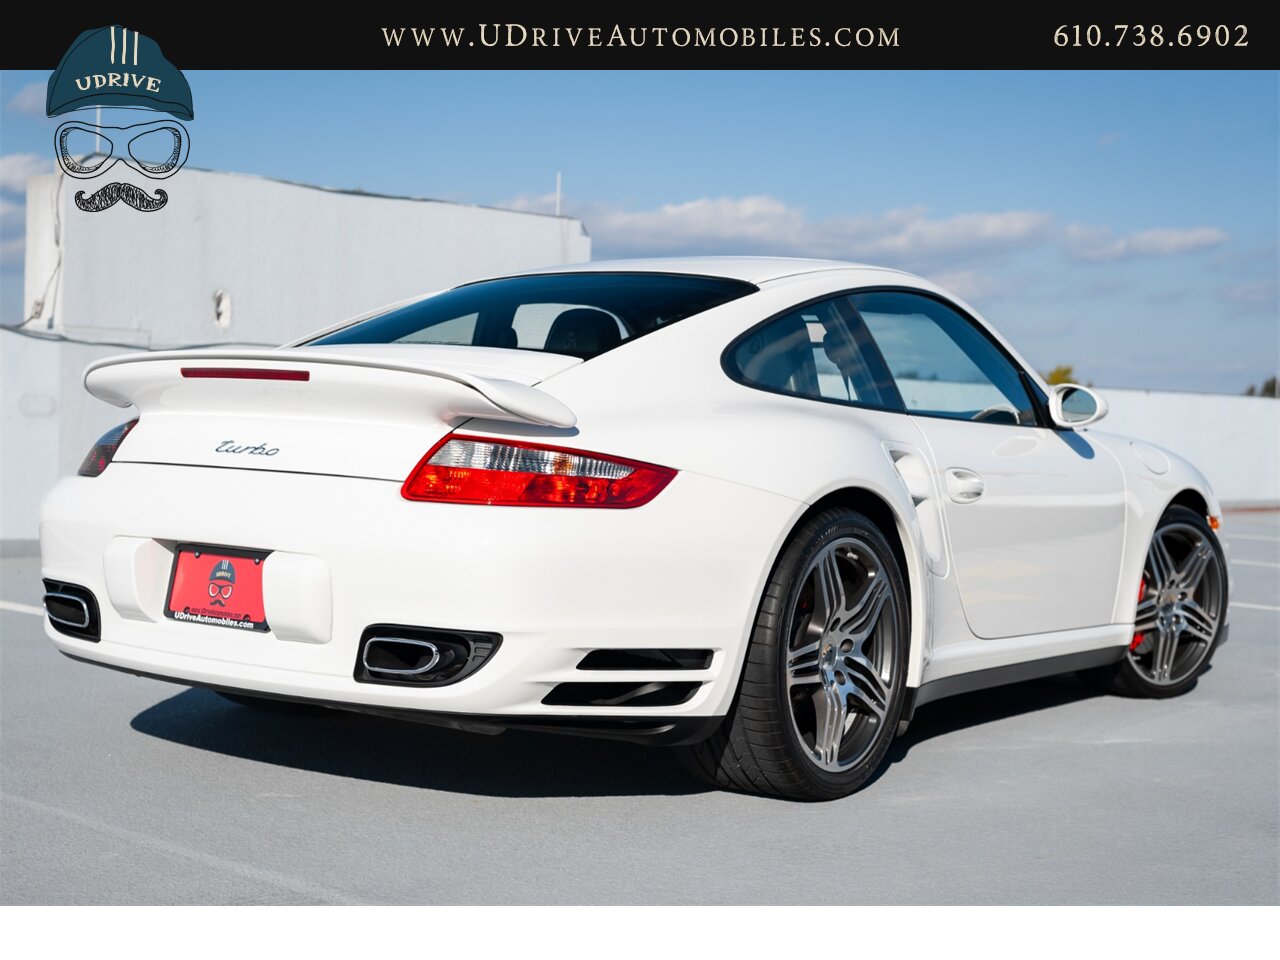 2007 Porsche 911 Turbo 642 Miles 1 Owner Carrara White 997  Sport Chrono Adaptive Sport Seats All Documentation from New - Photo 4 - West Chester, PA 19382